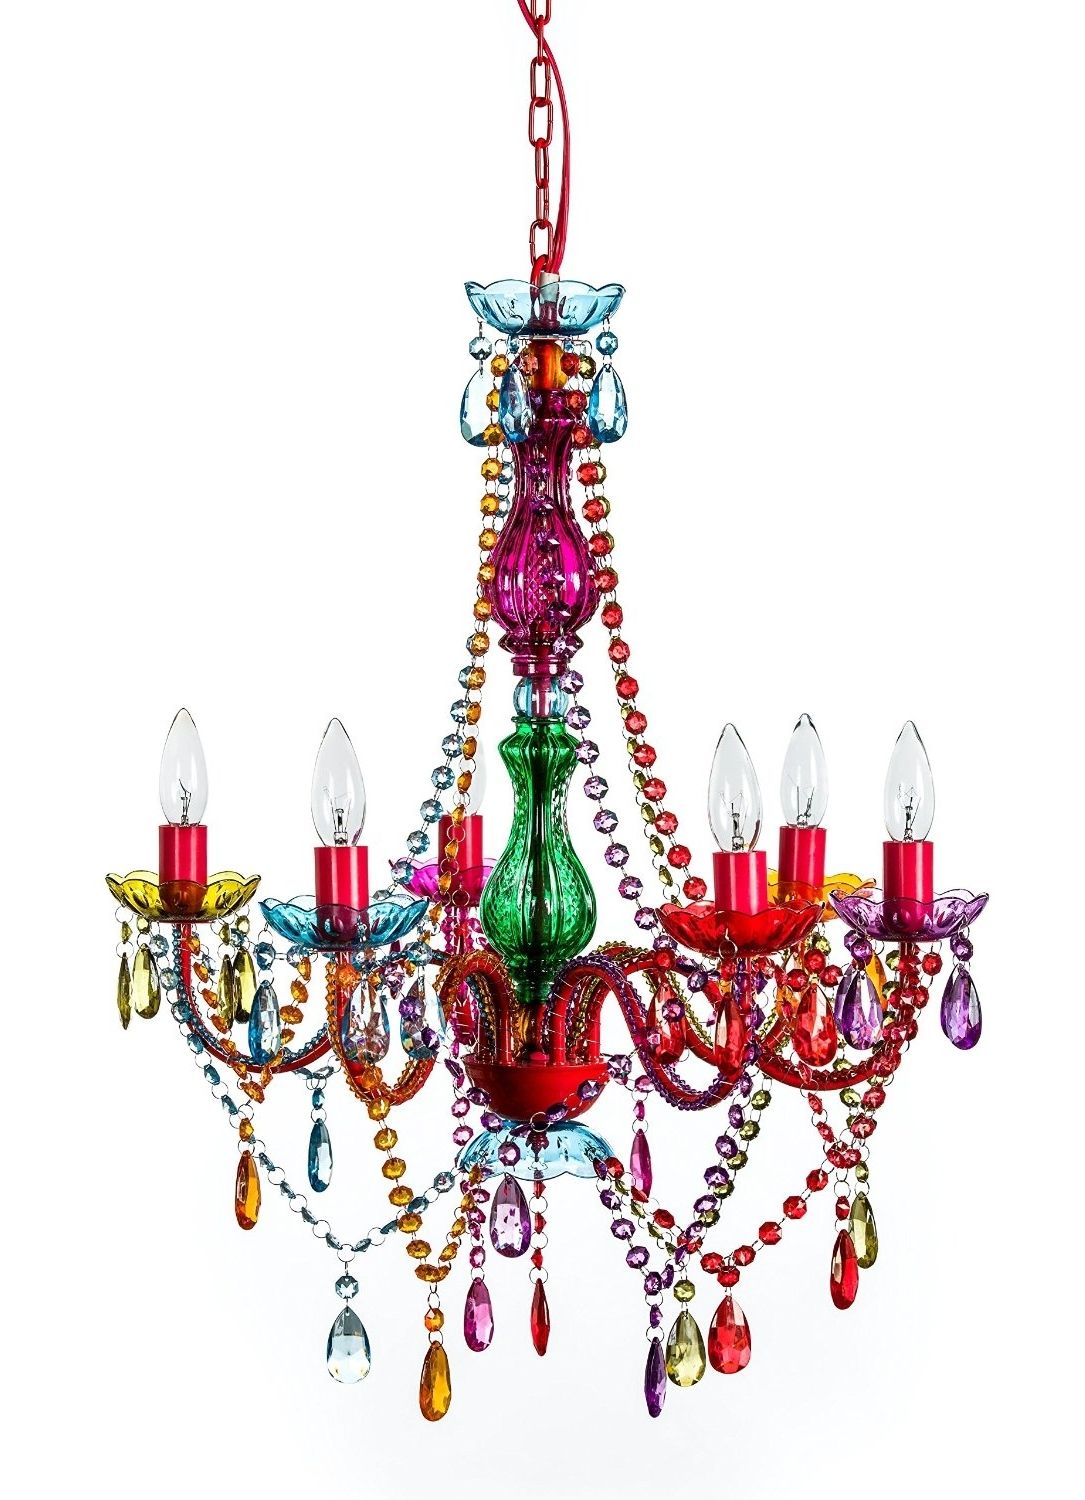 2018 Colourful Chandeliers With Regard To Bohemian Gypsy Colorful 6 Arm Large Multi Color Chandelier Lighting (View 7 of 20)